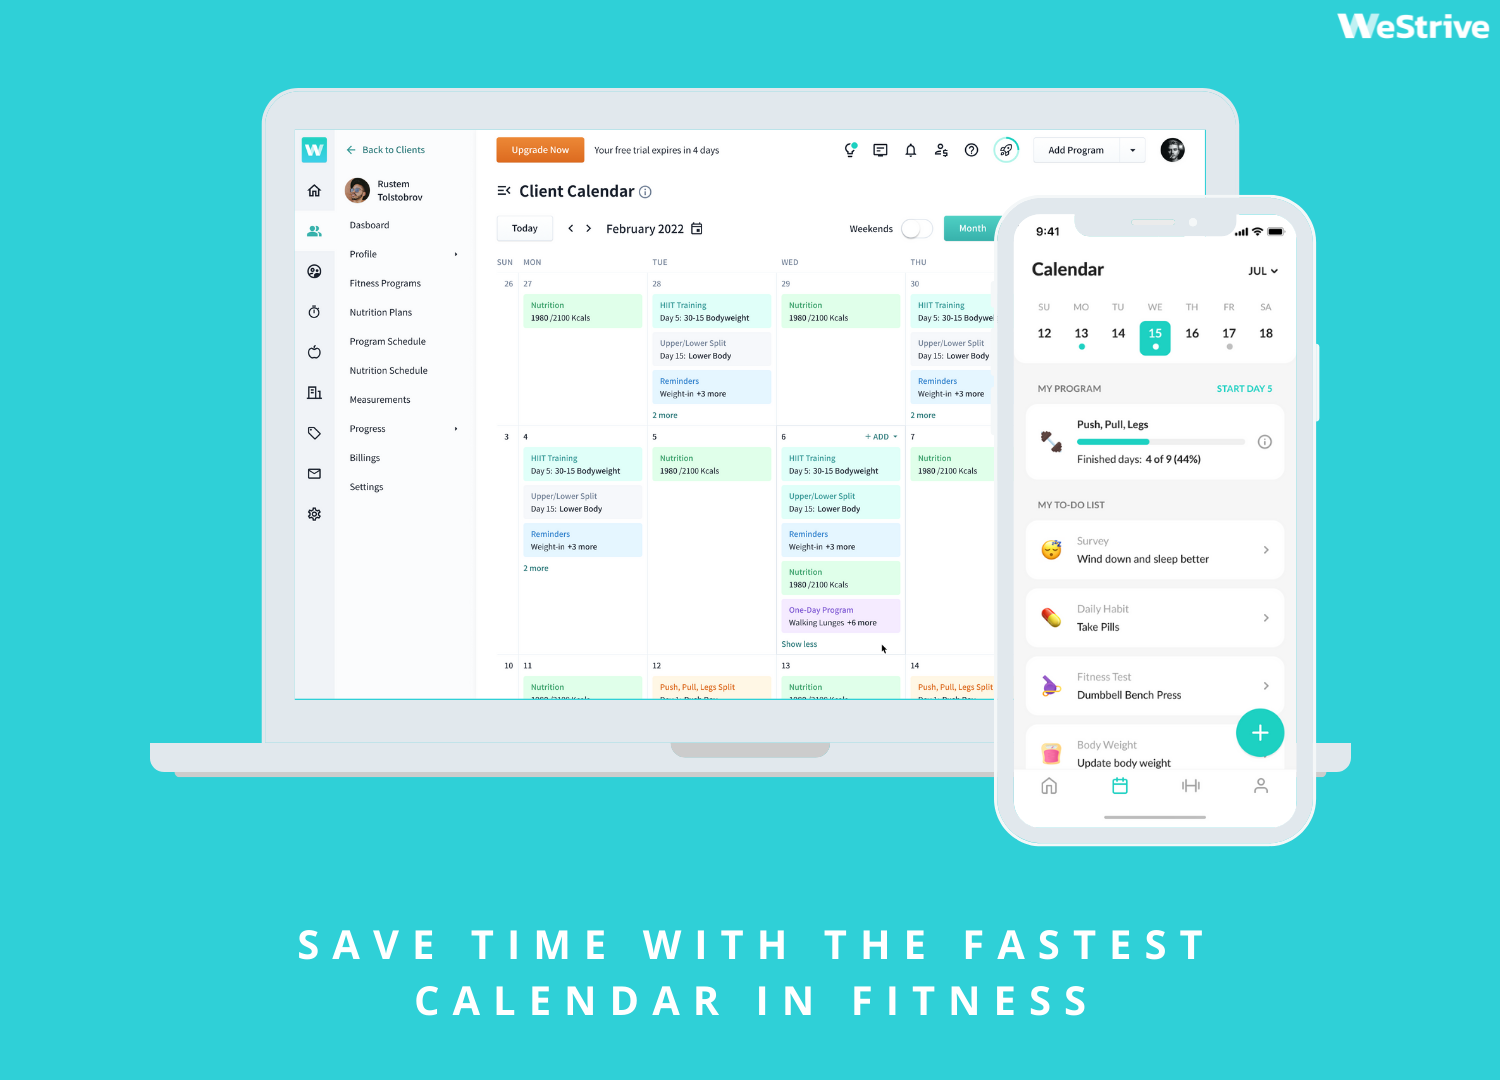 Save time with the fastest calendar in fitness